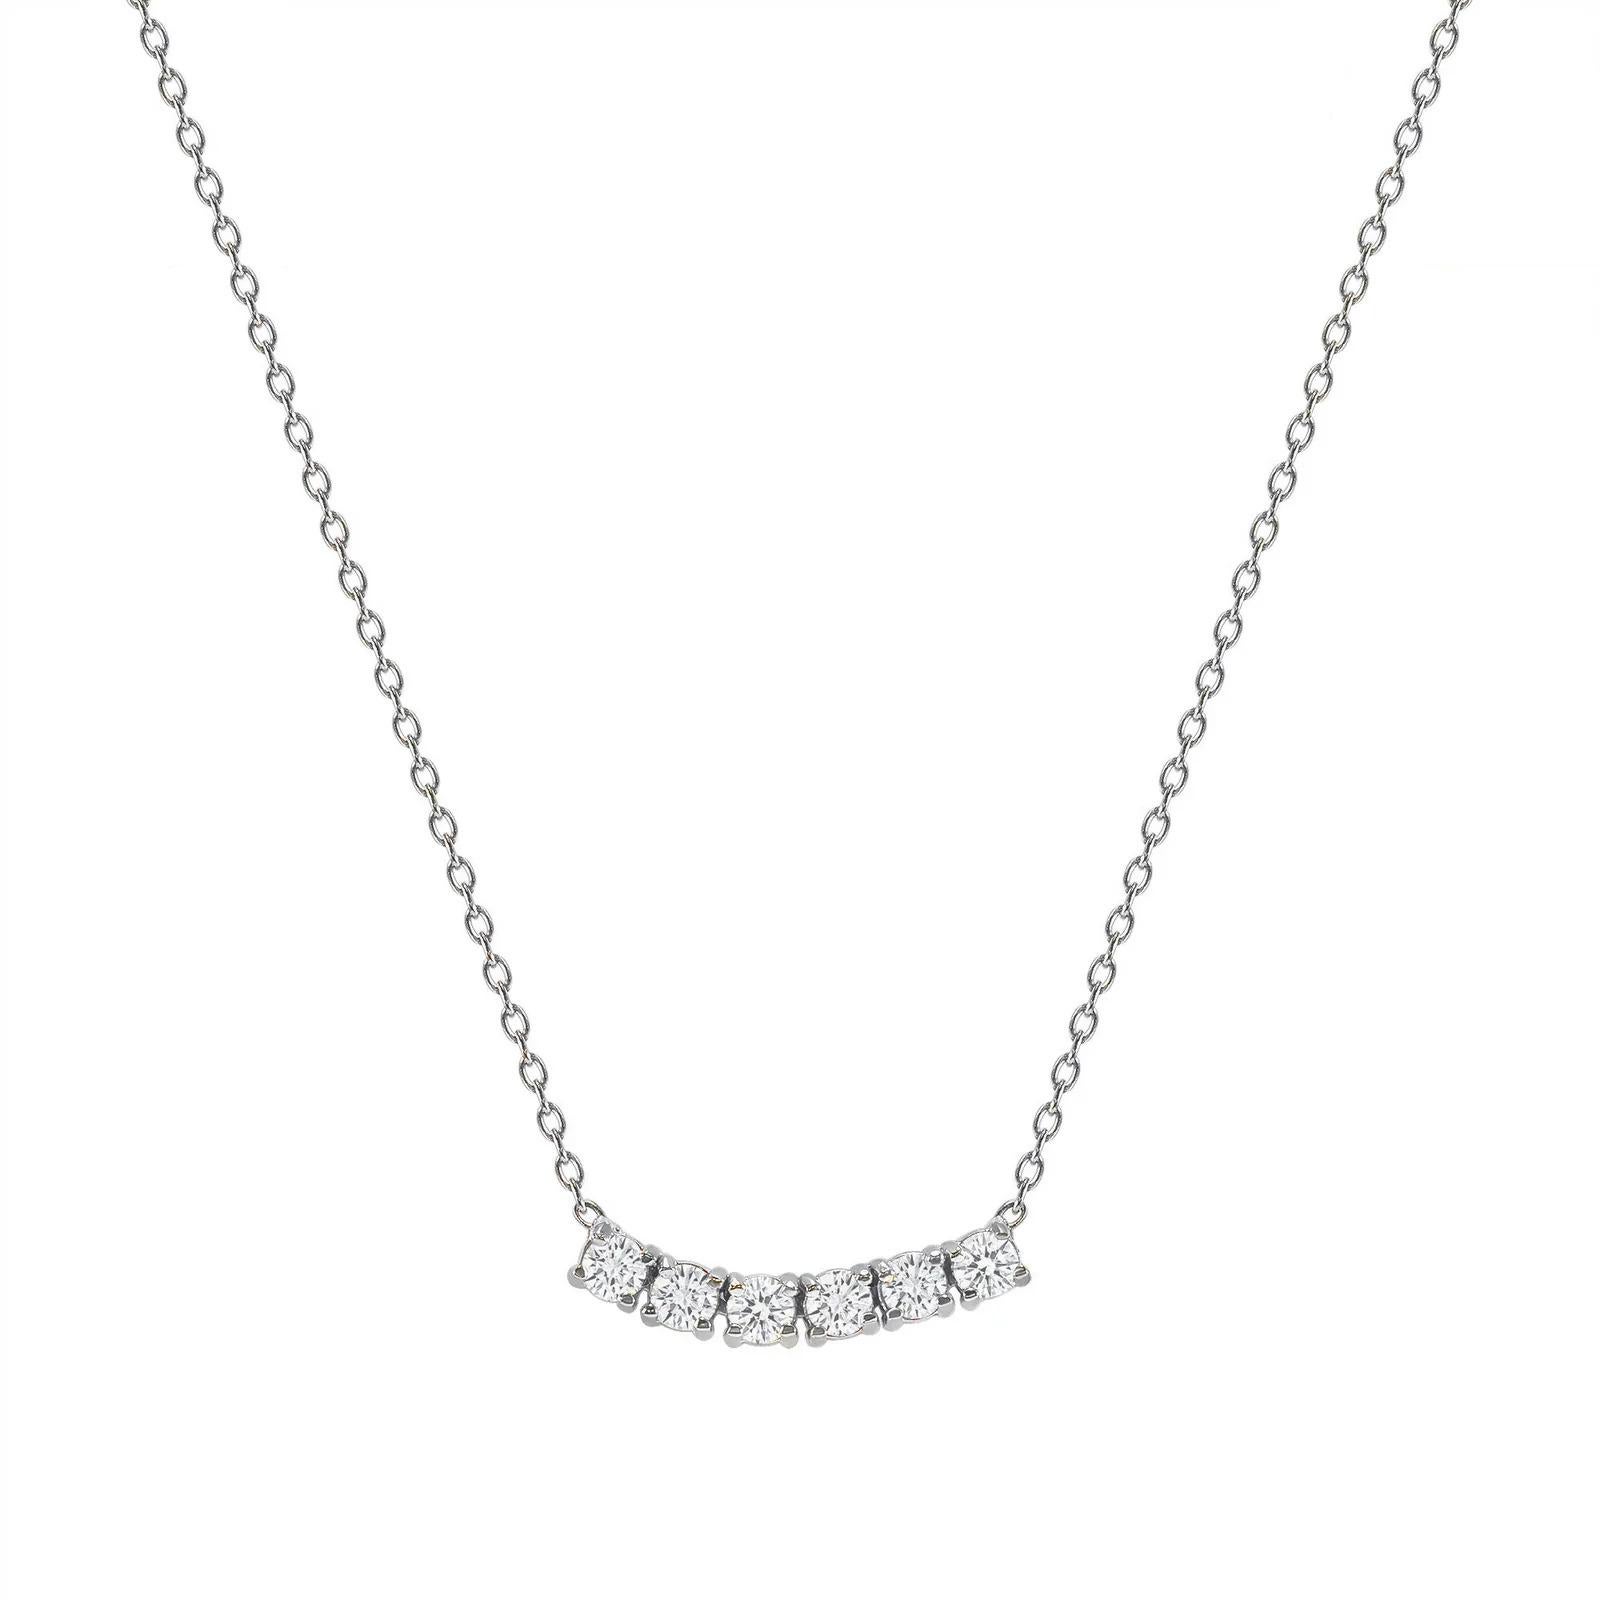 This petite, curved diamond necklace is crafted with gorgeous 14k gold set with six round diamonds.  

Gold: 14k 
Diamond Total Carats: 2 ct
Diamond Cut: Round (6 diamonds)
Diamond Clarity: VS
Diamond Color: F
Color: White Gold
Necklace Length: 24